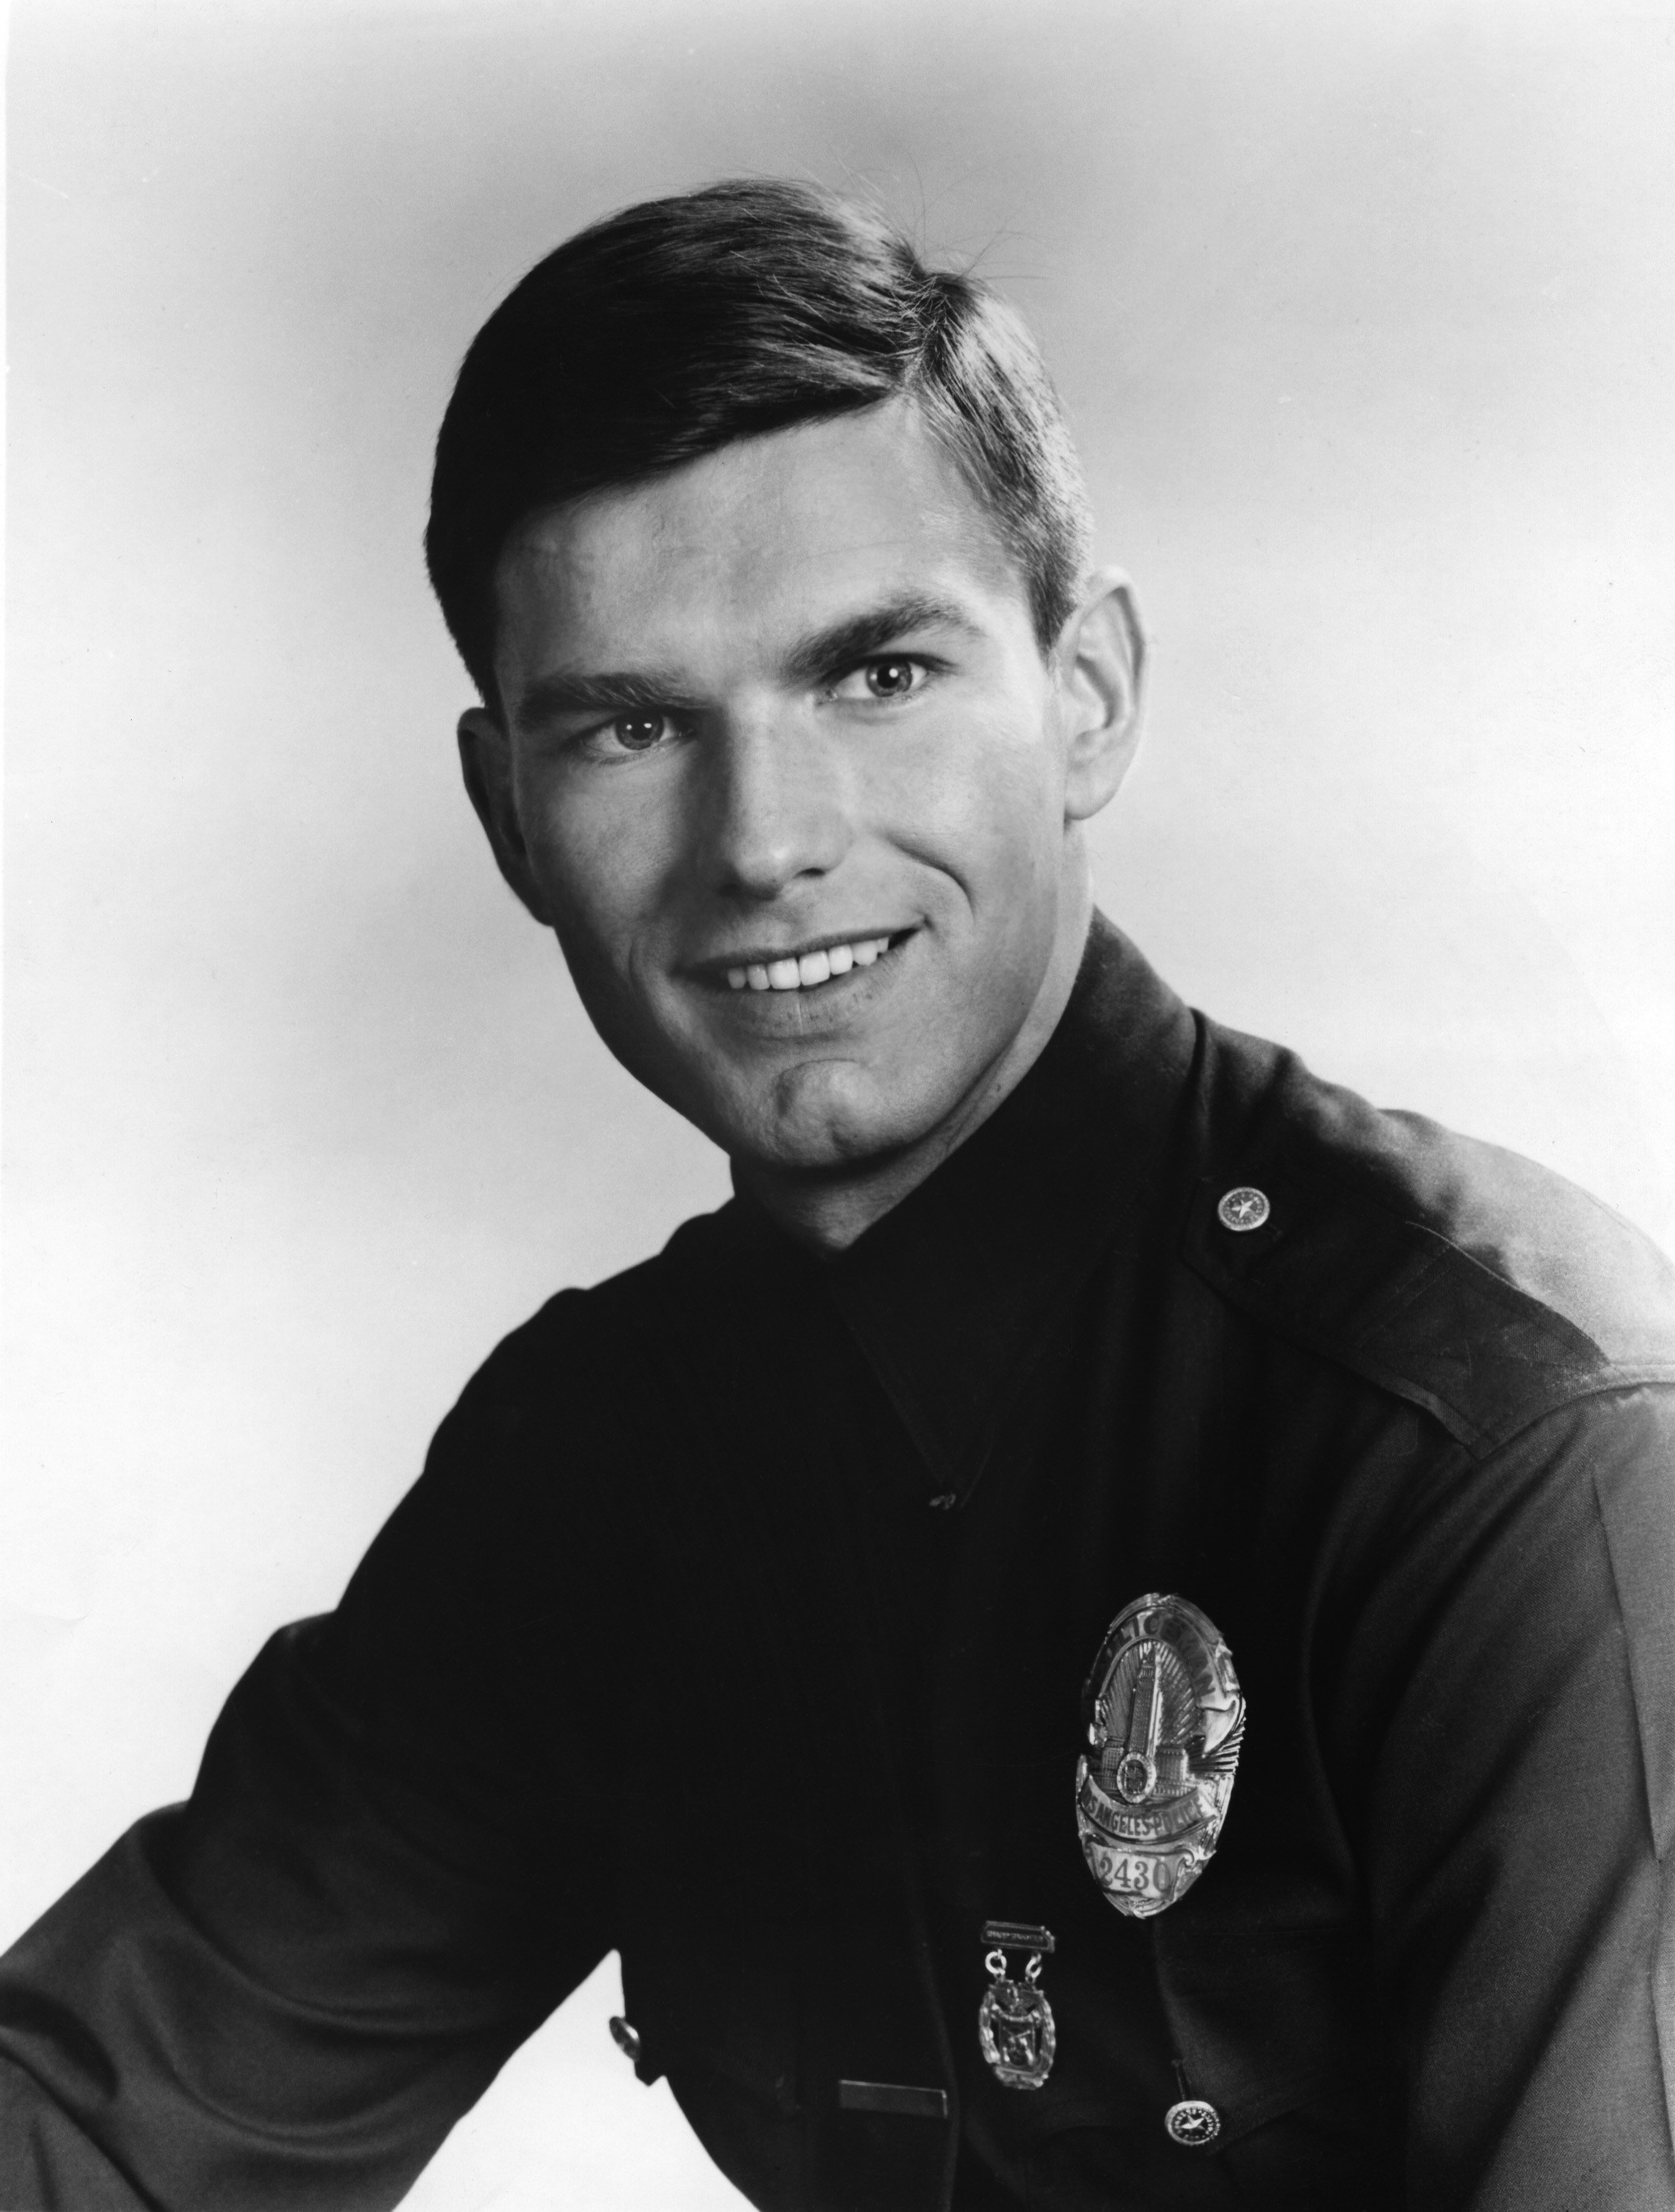 Kent McCord Became Reserve Officer after 'Adam12' He Chose to